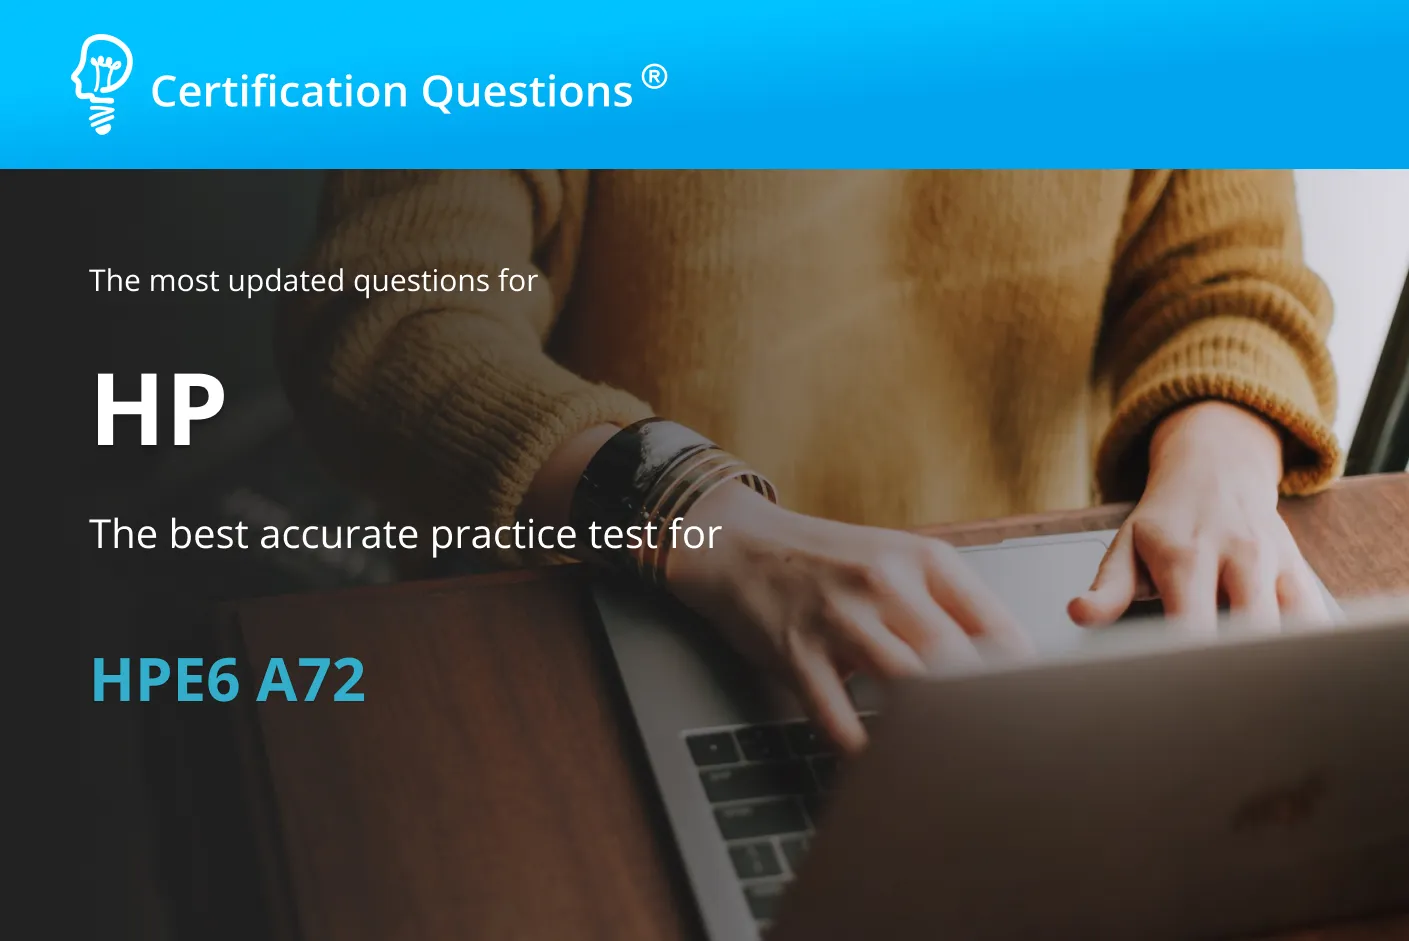 This image is related to HPE6-a72 Practice Test in USA